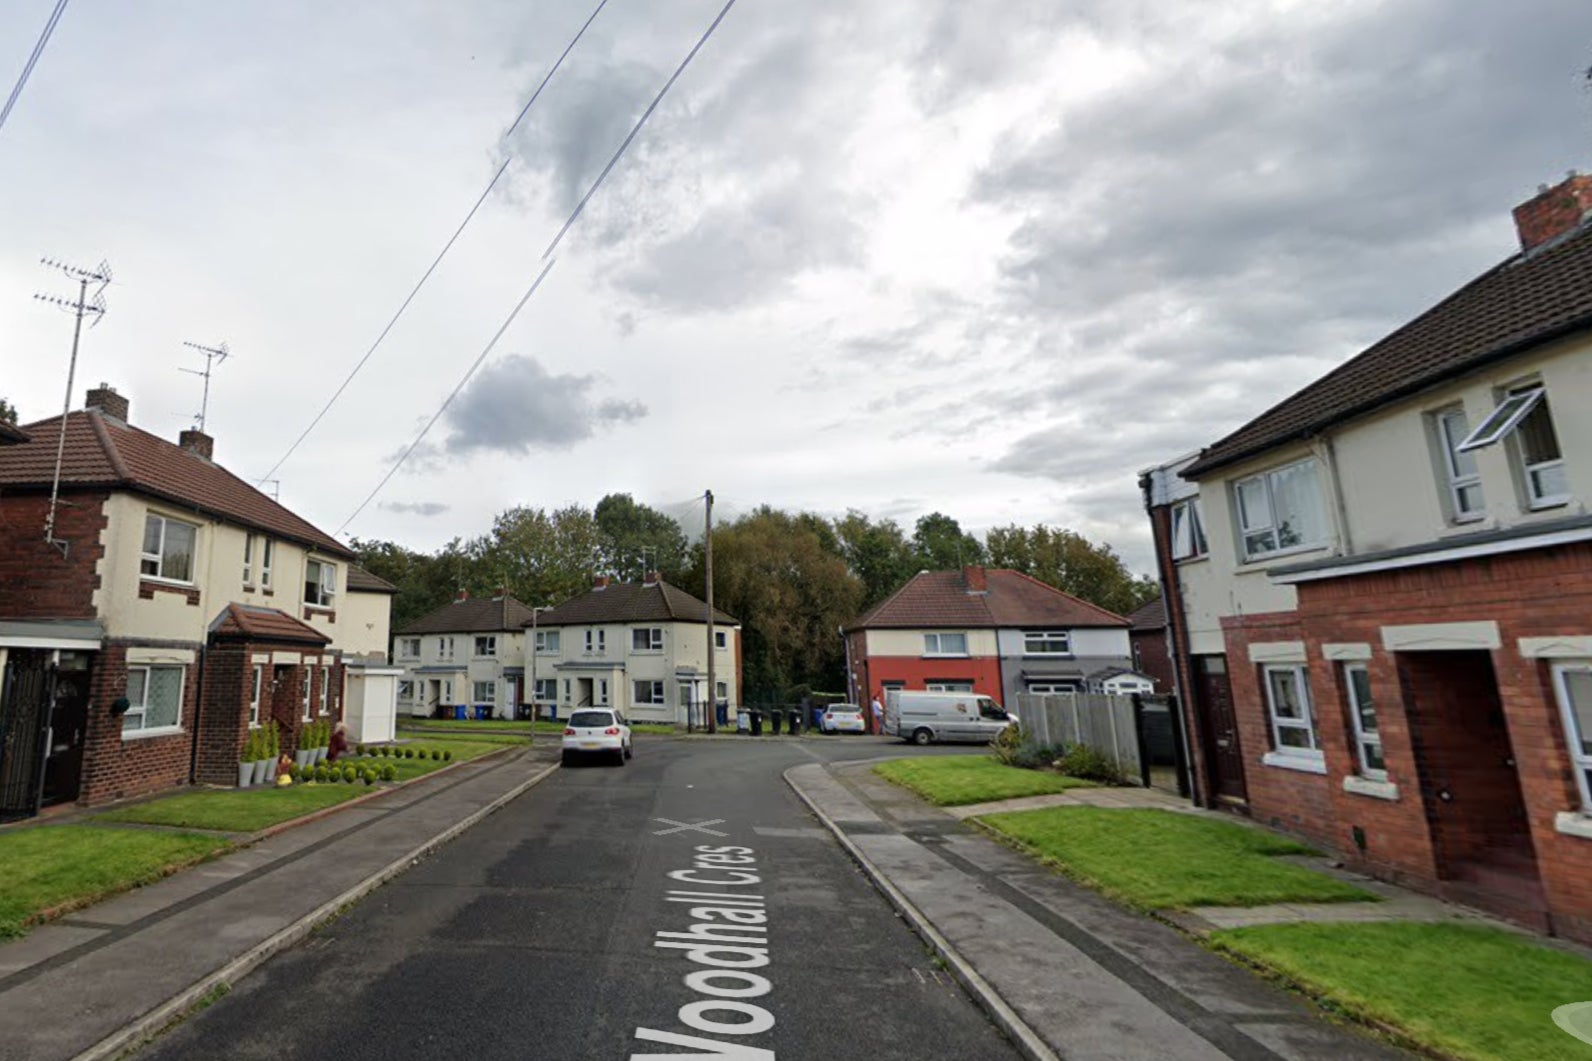 A bomb squad was called to Woodhall Crescent in Reddish, Stockport